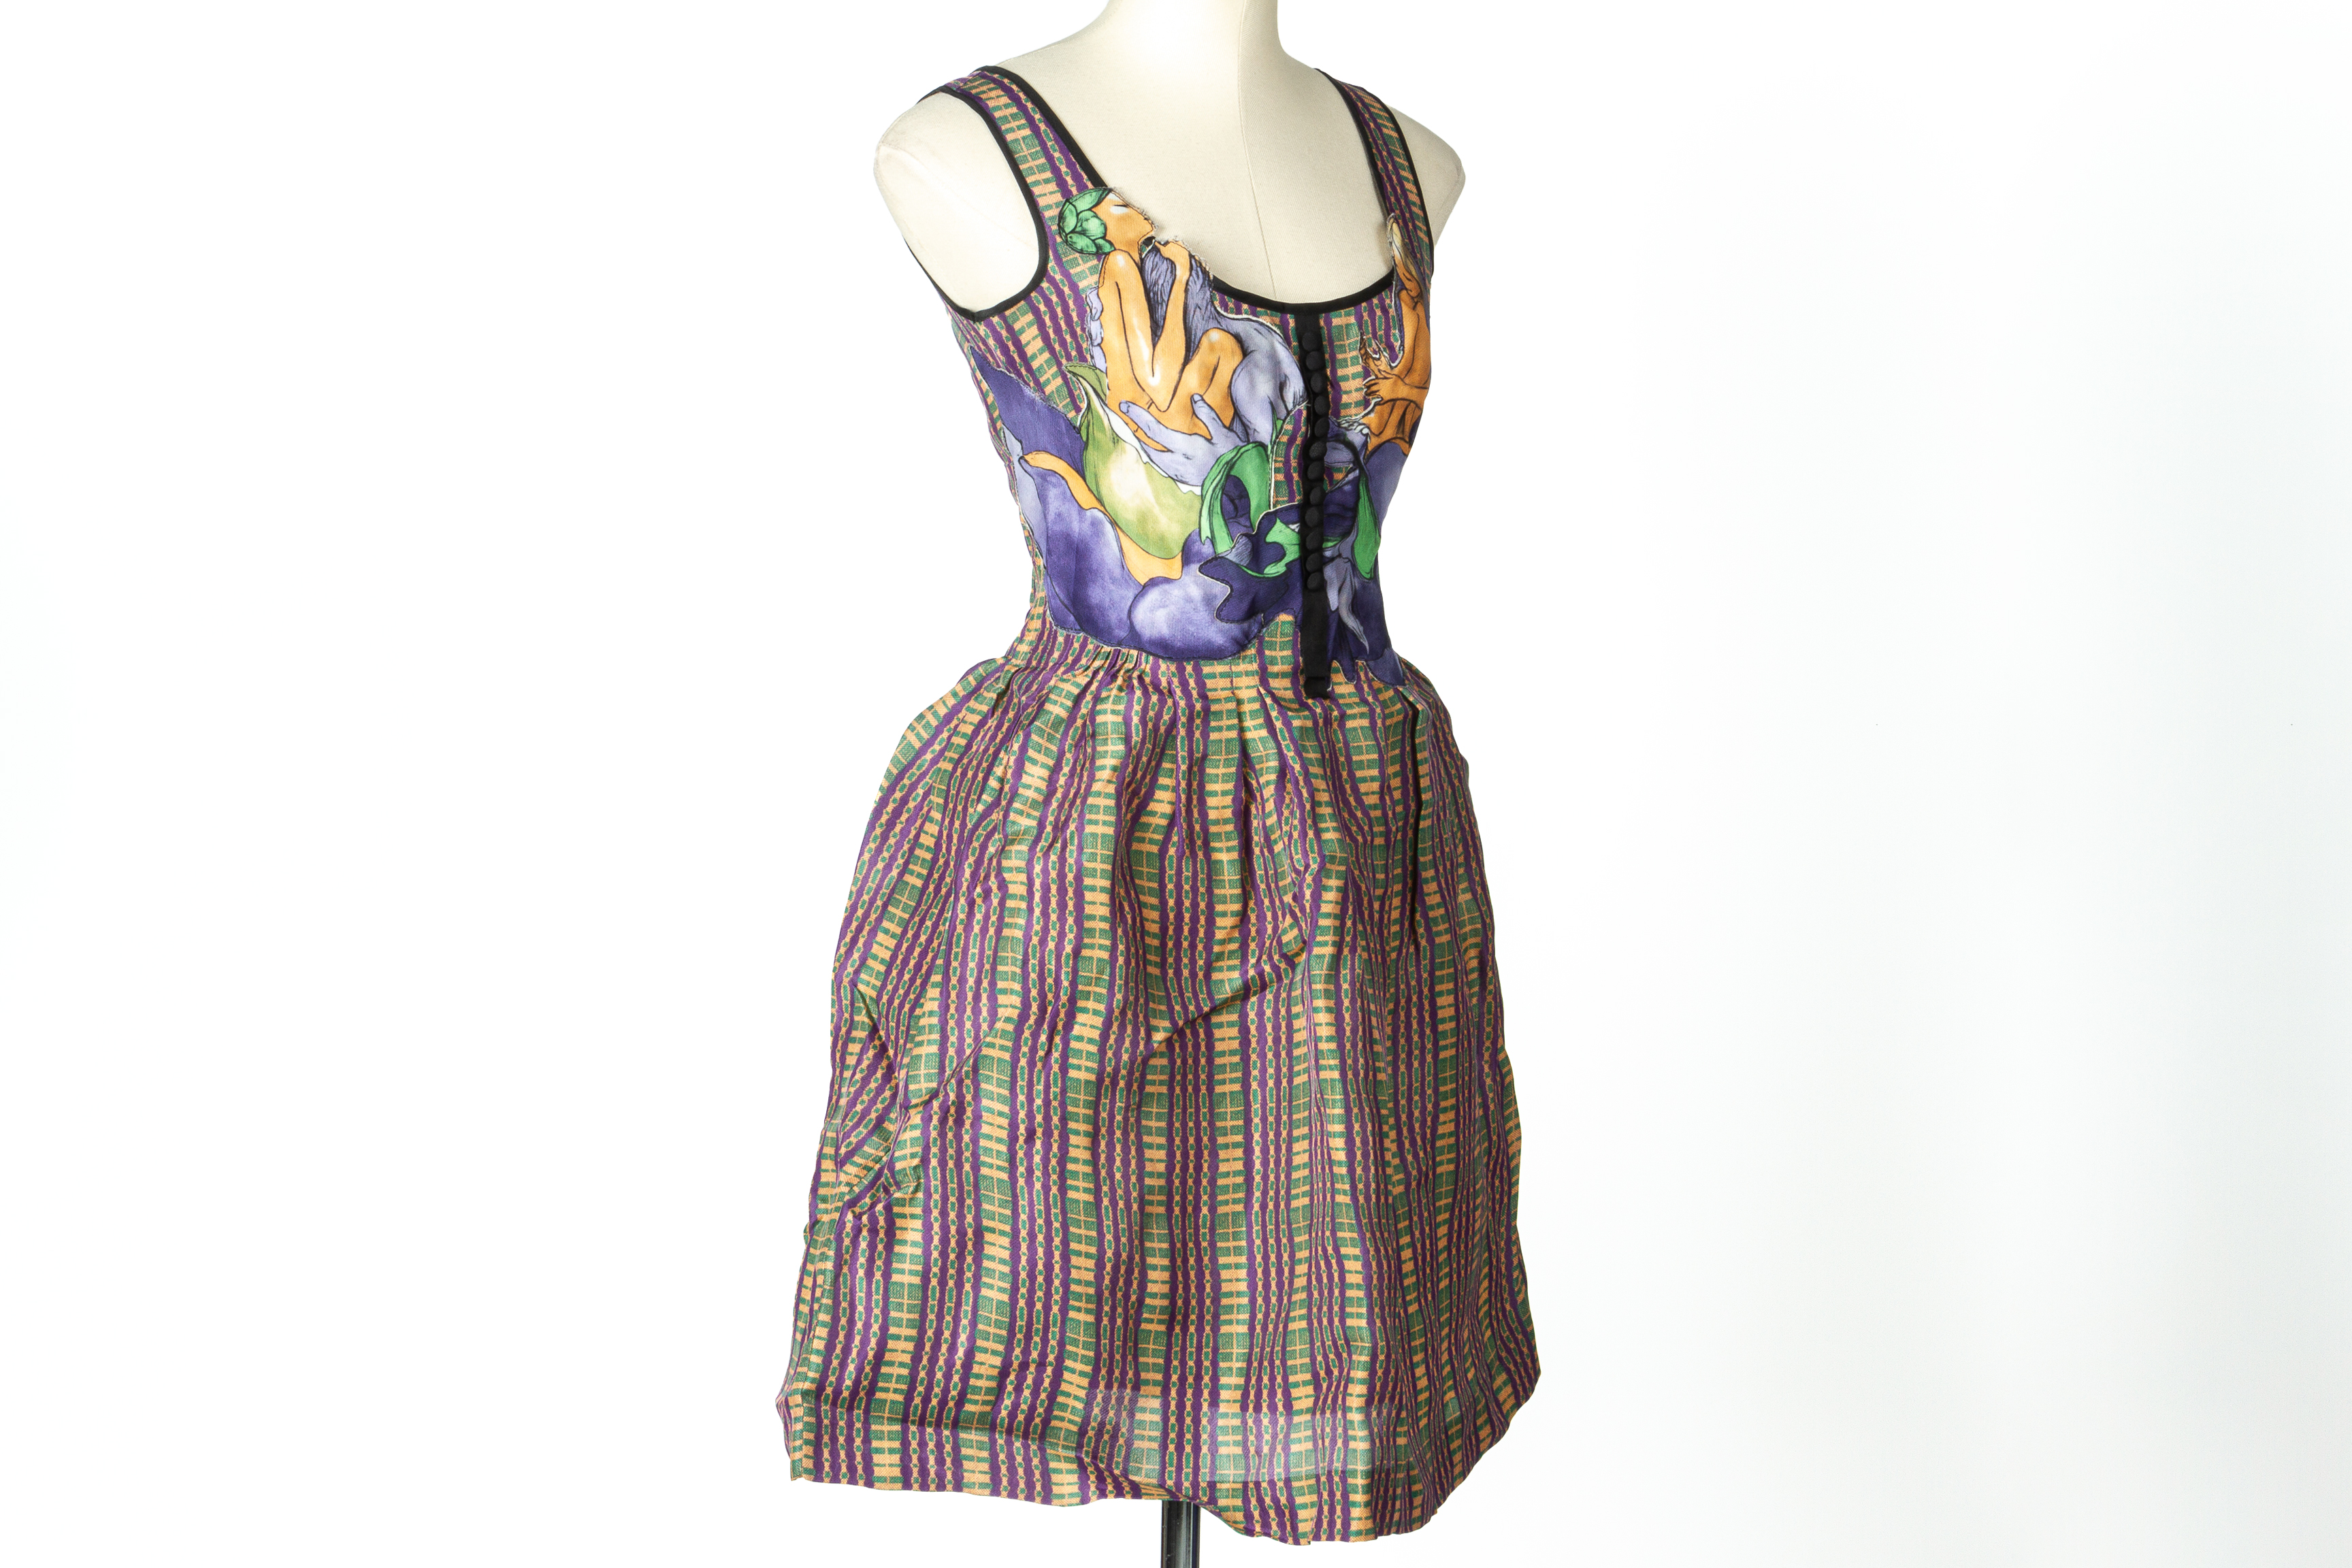 A PRADA DRESS FROM THE 'TREMBLED BLOSSOMS' 2008 COLLECTION - Image 2 of 3